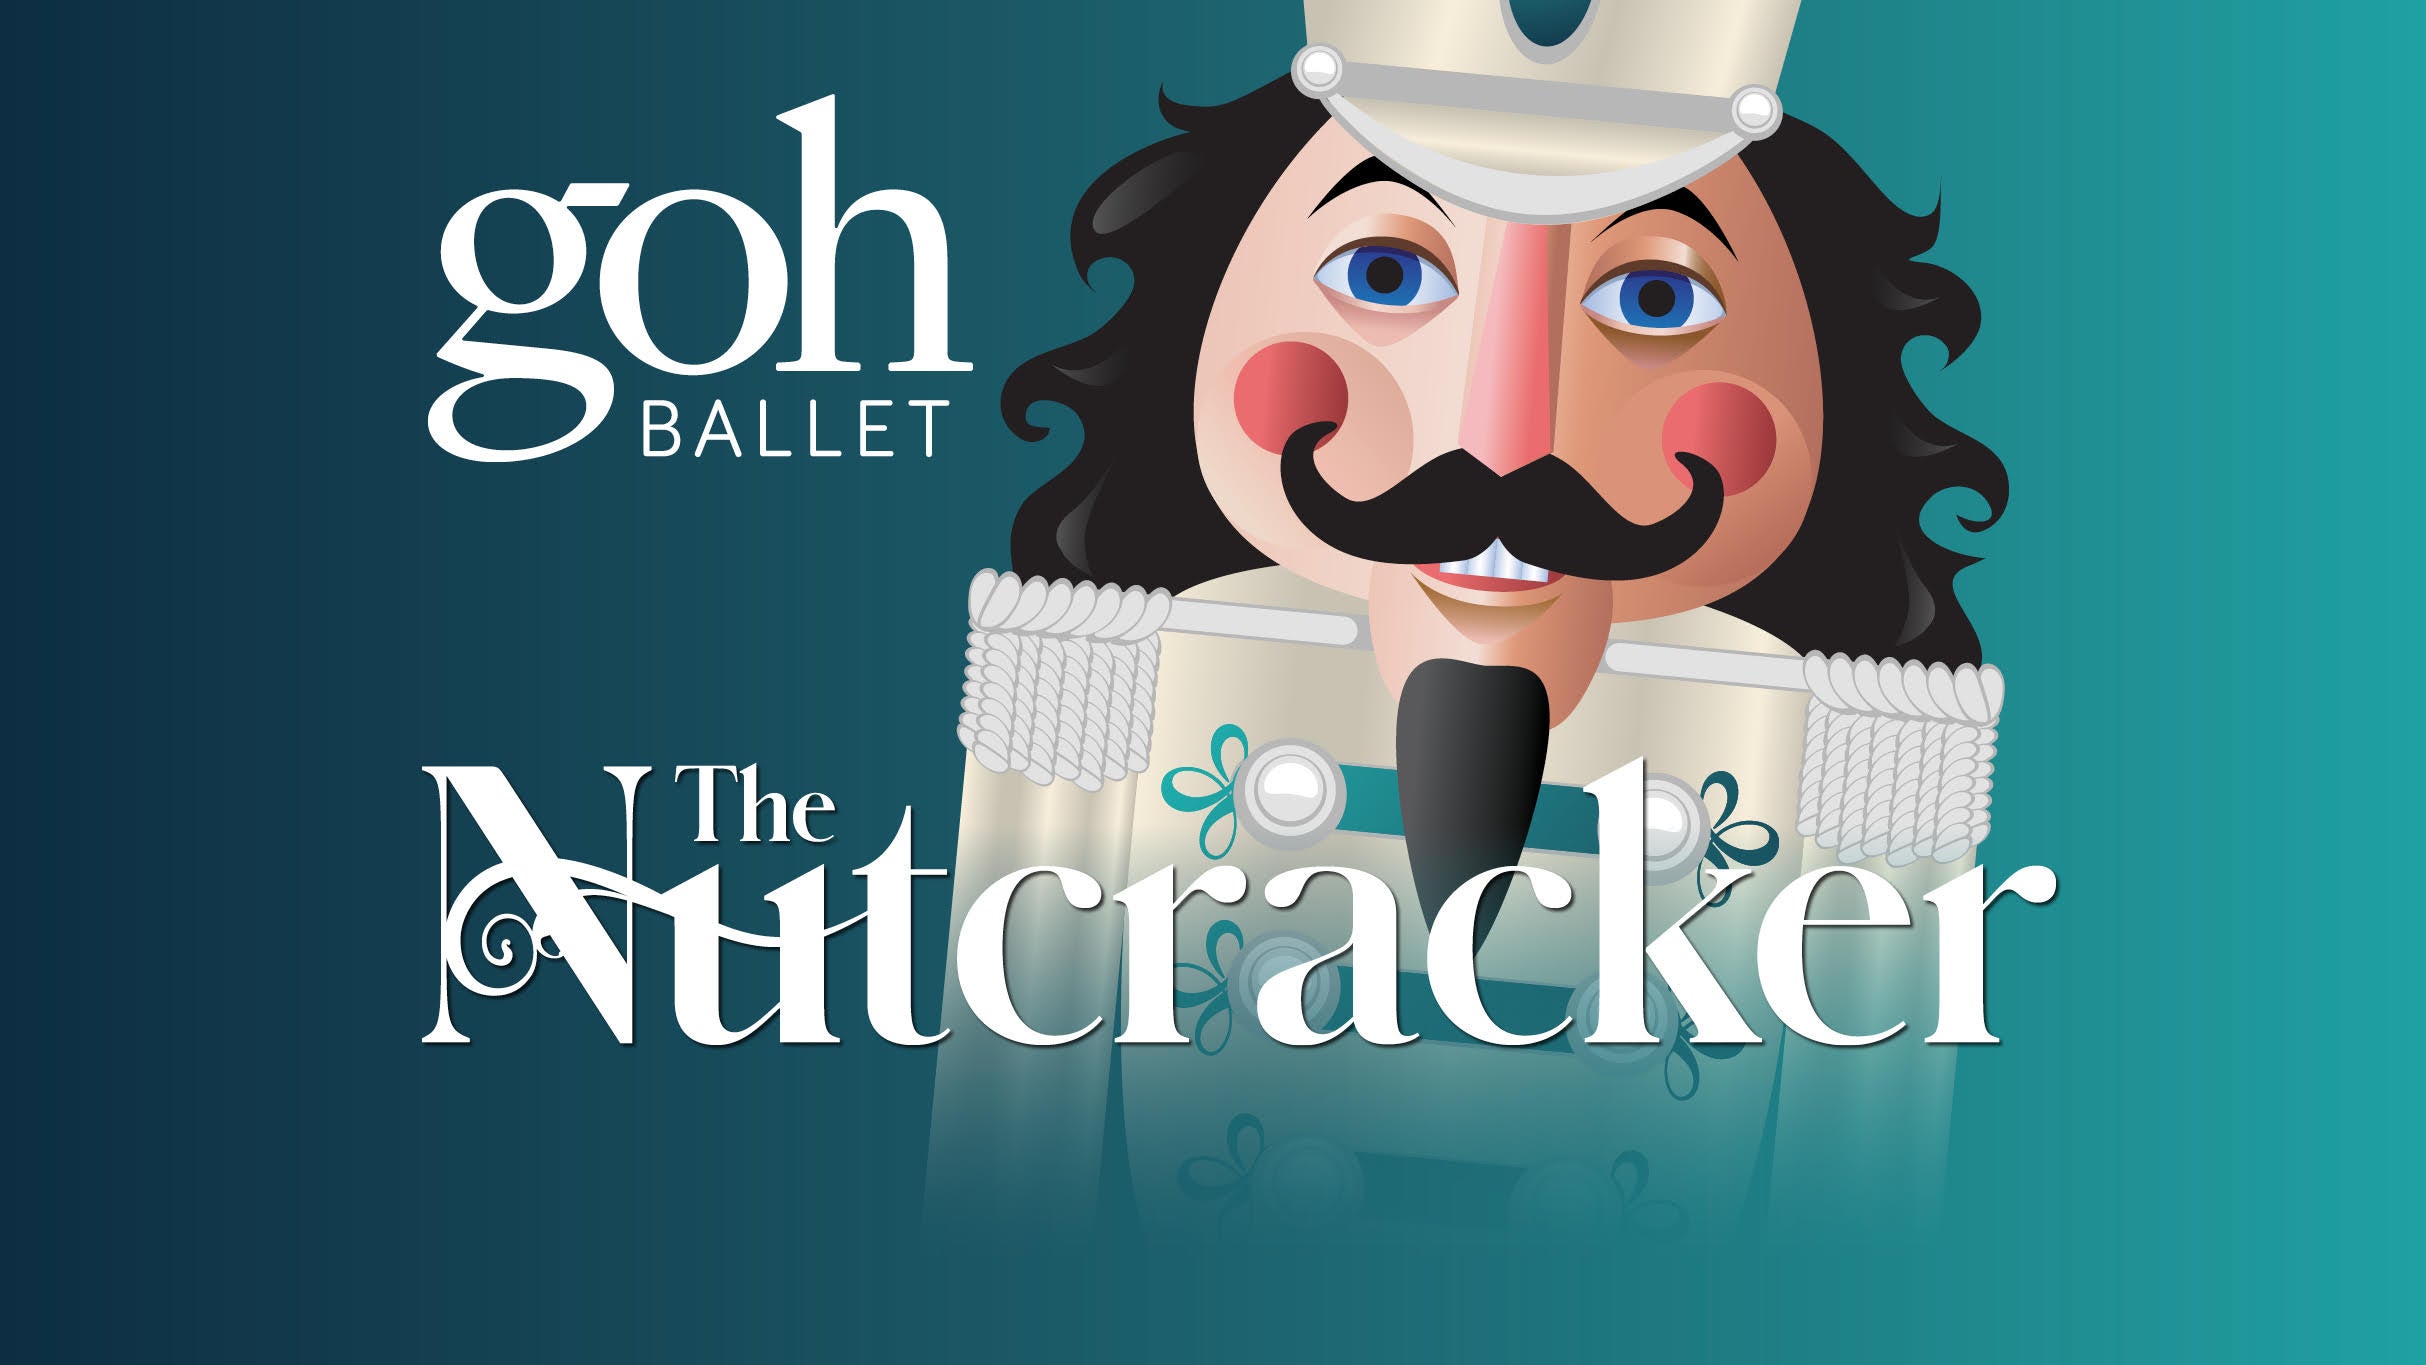 Goh Ballet's The Nutcracker Presented by RBC in Vancouver promo photo for Christmas in July Promo presale offer code